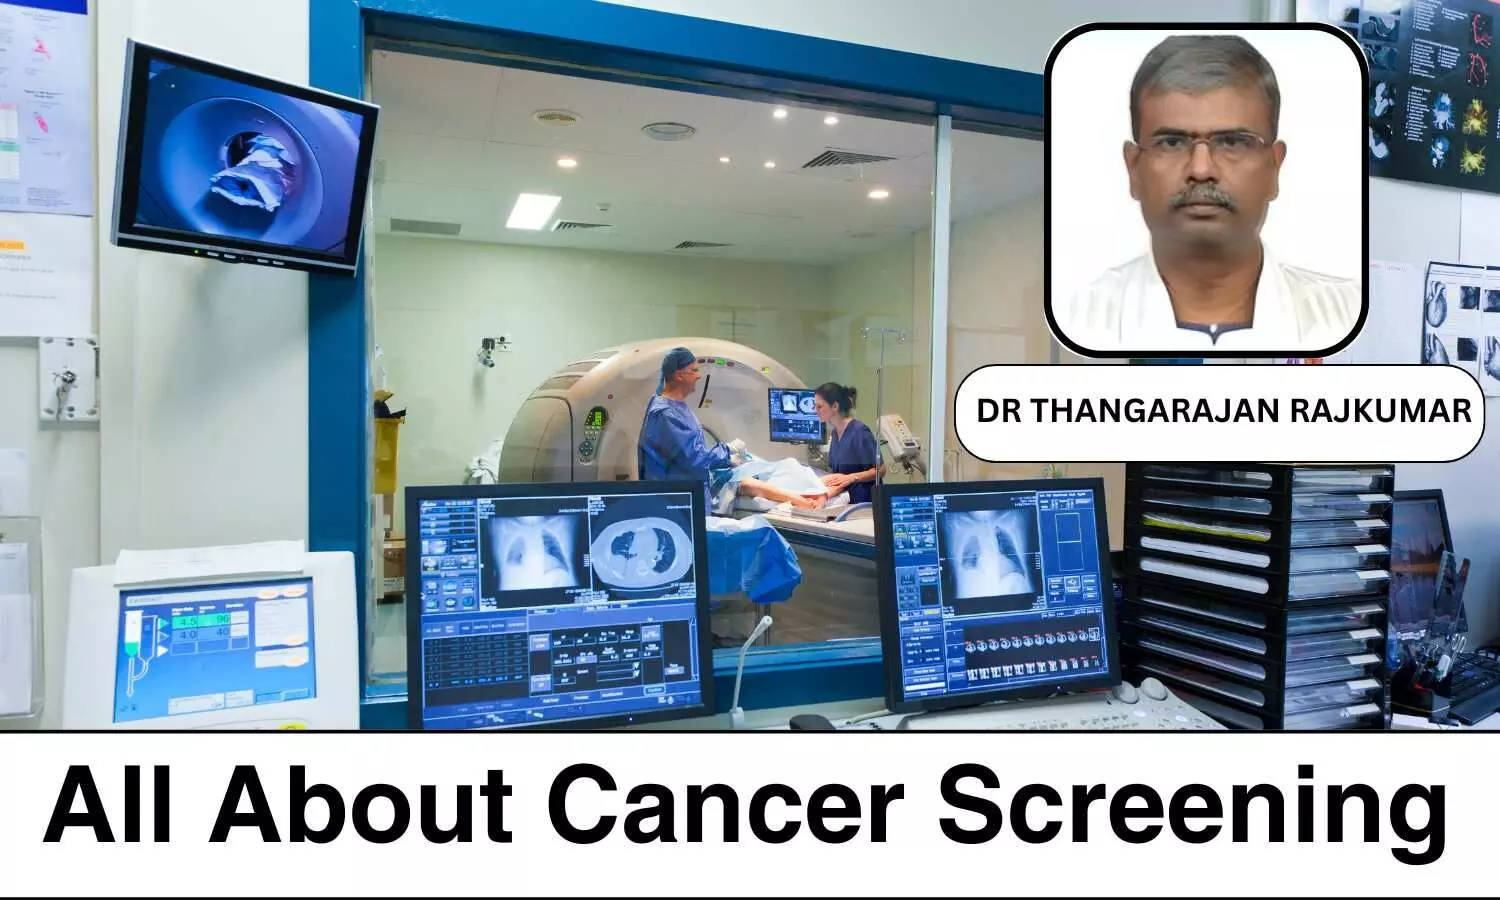 Cancer Screening – What to expect and why it matters? - Dr Thangarajan Rajkumar